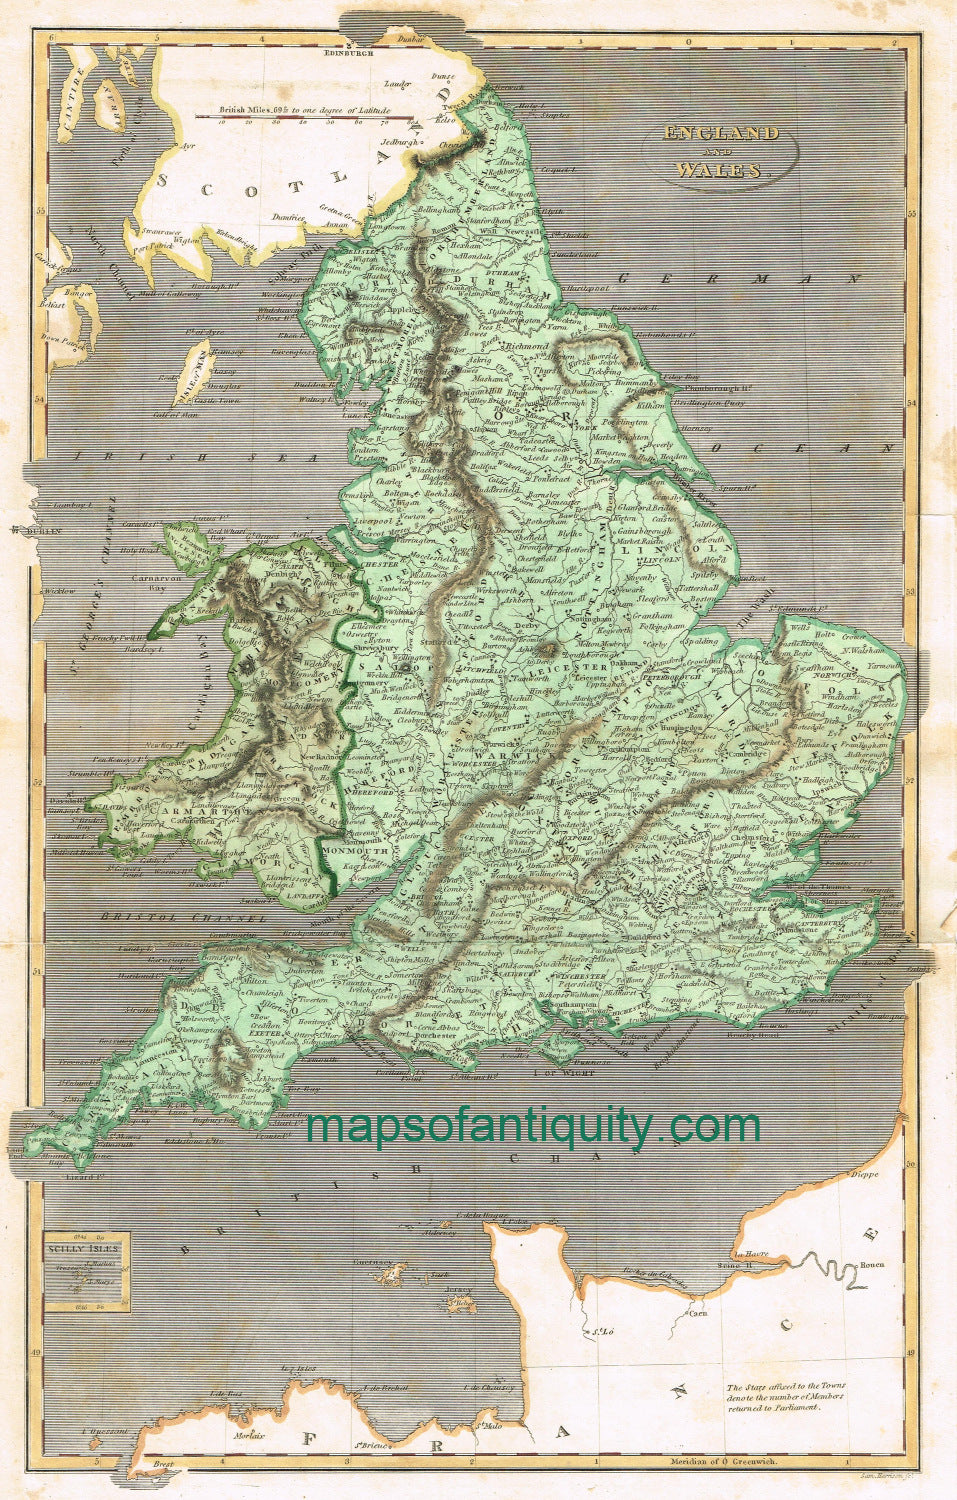 Antique-Hand-Colored-Map-England-and-Wales.-Europe-United-Kingdom-c.-1790-Harrison-Maps-Of-Antiquity